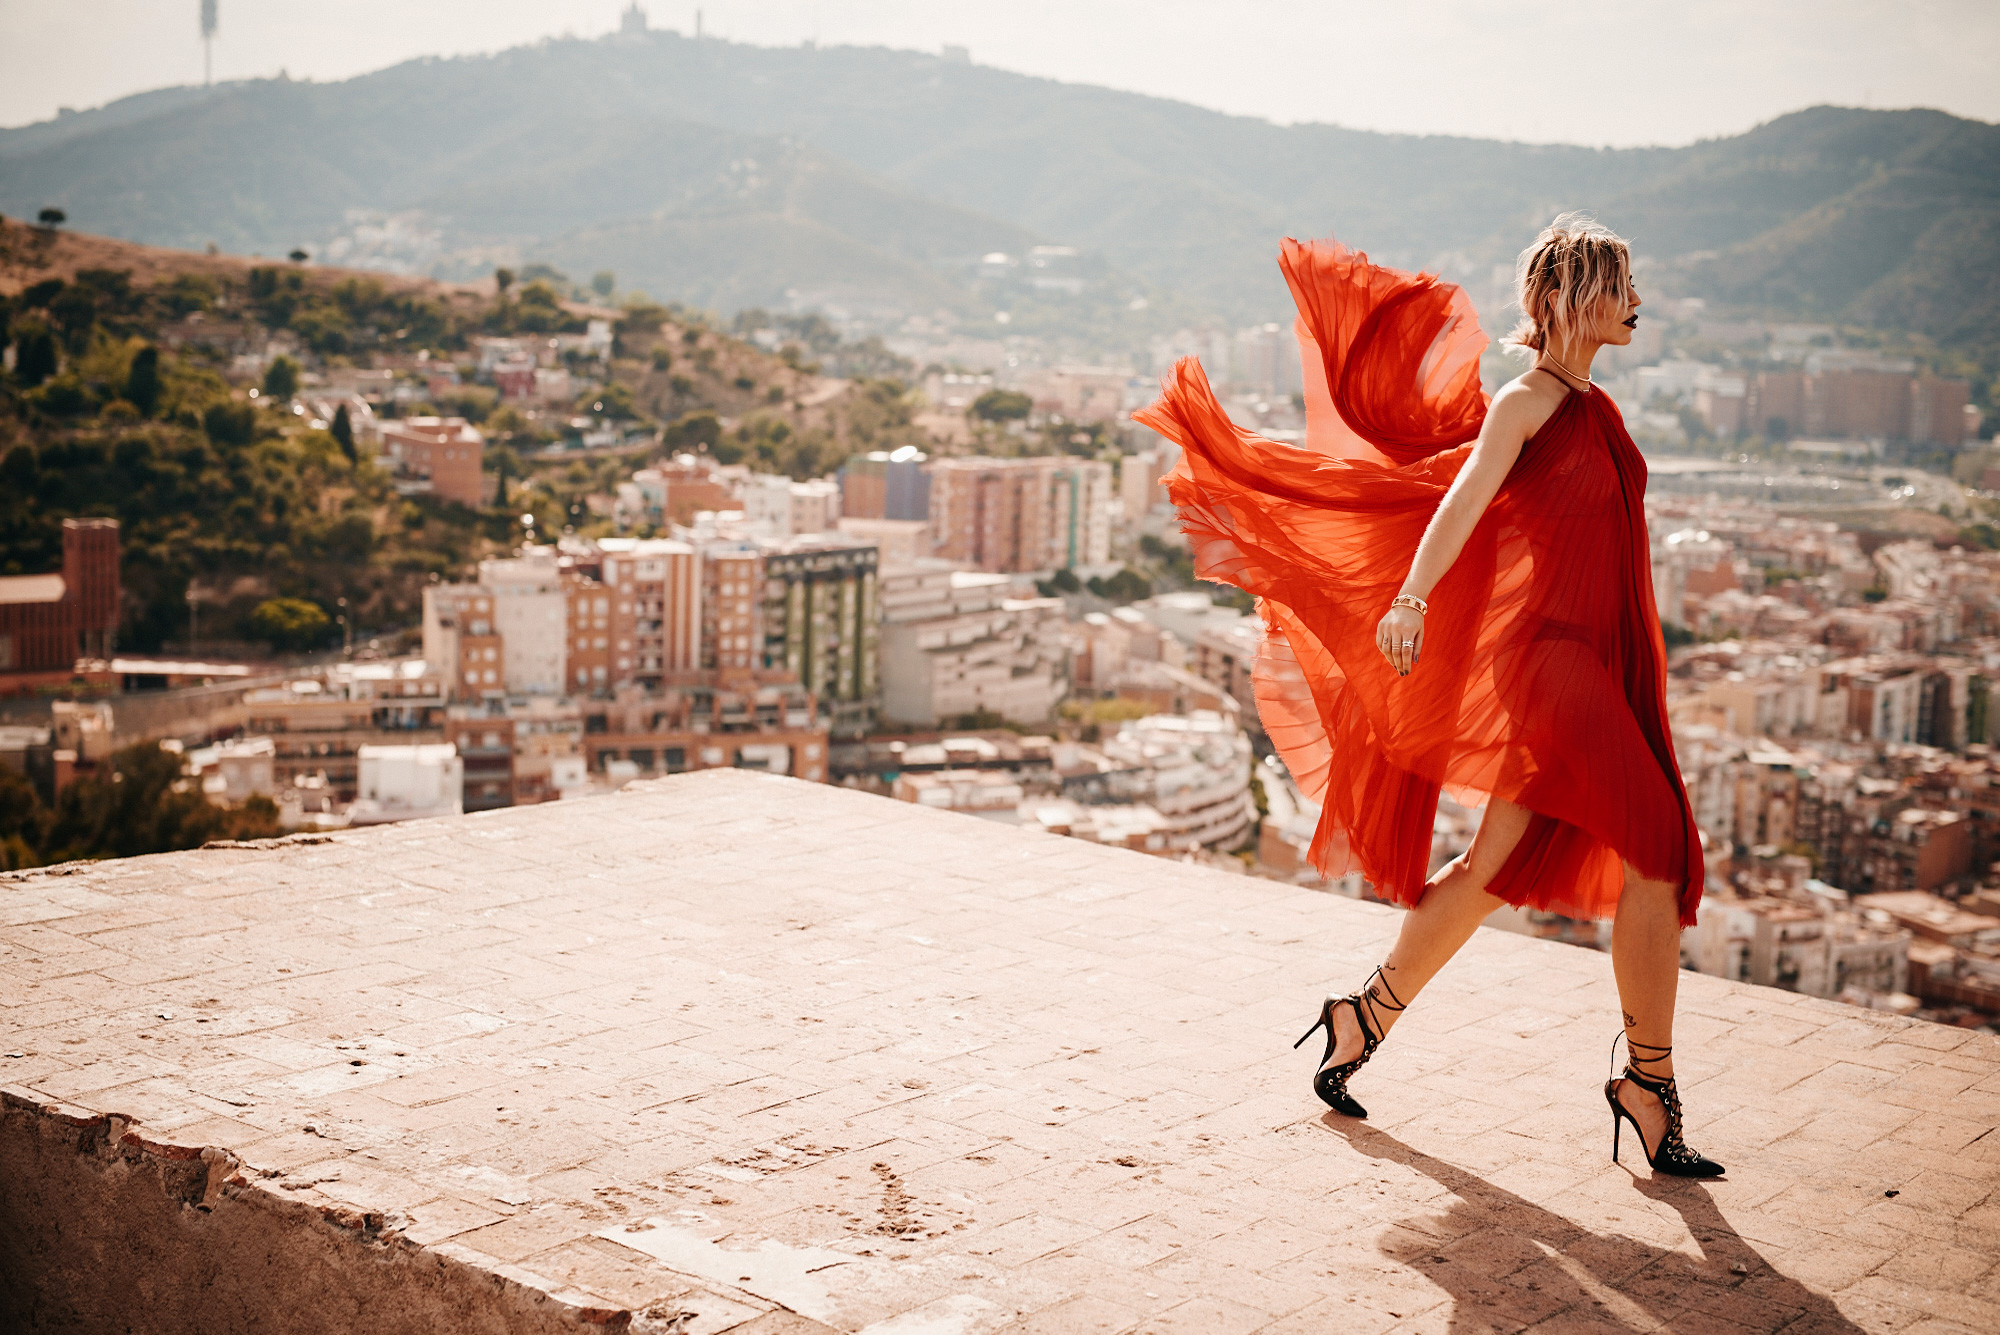 the lady in red | editorial fashion shooting in Barcelona with a view | red carpet dress from Dawid Tomaszewski and lace up heels from Elisabetta Franchi | style blogger Masha Sedgwick from Germany